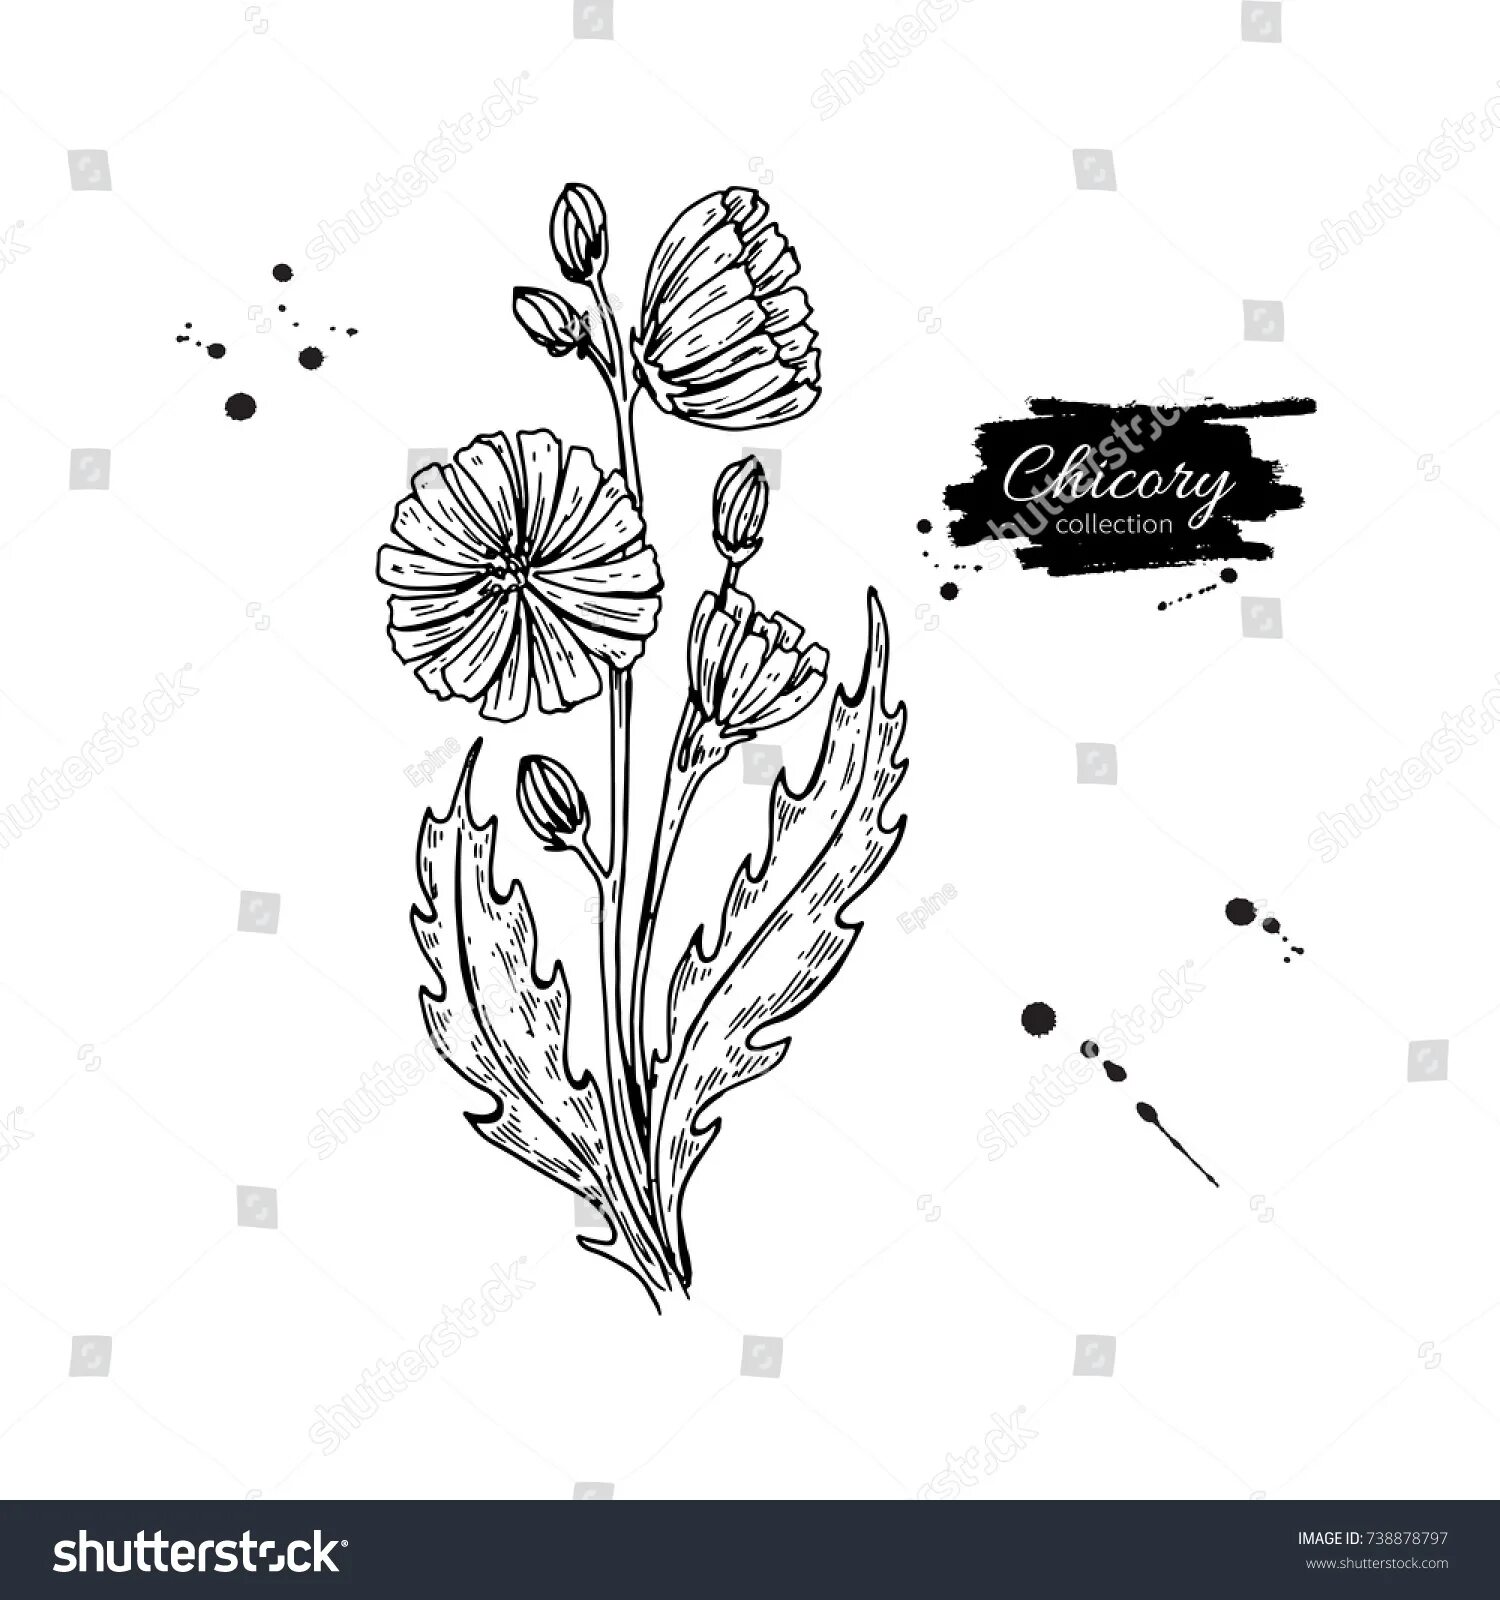 Sparkly chicory coloring page